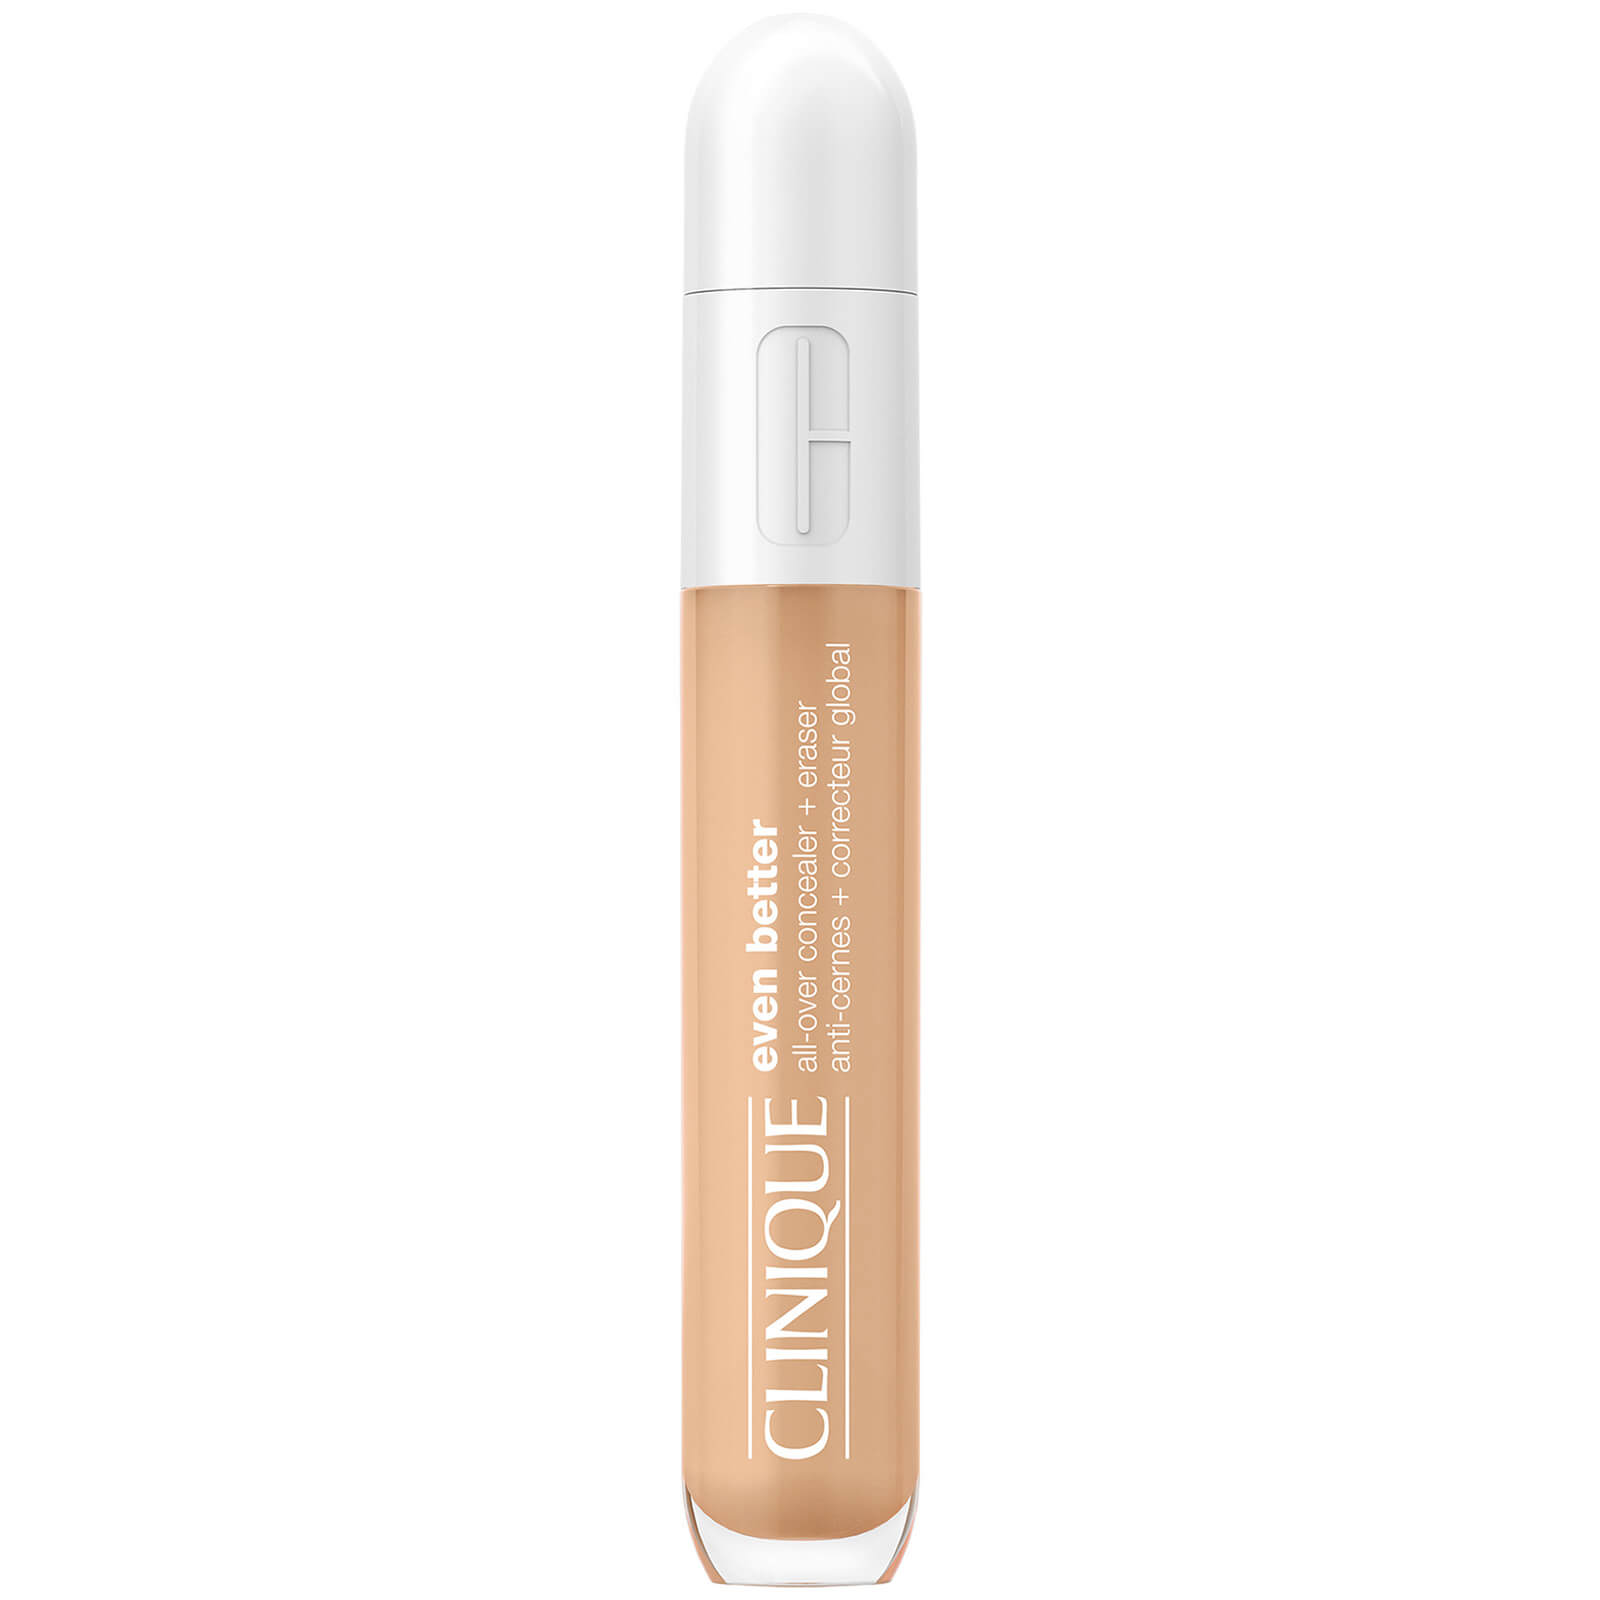 Clinique Even Better All-Over Concealer and Eraser 6ml (Various Shades) - CN 70 Vanilla